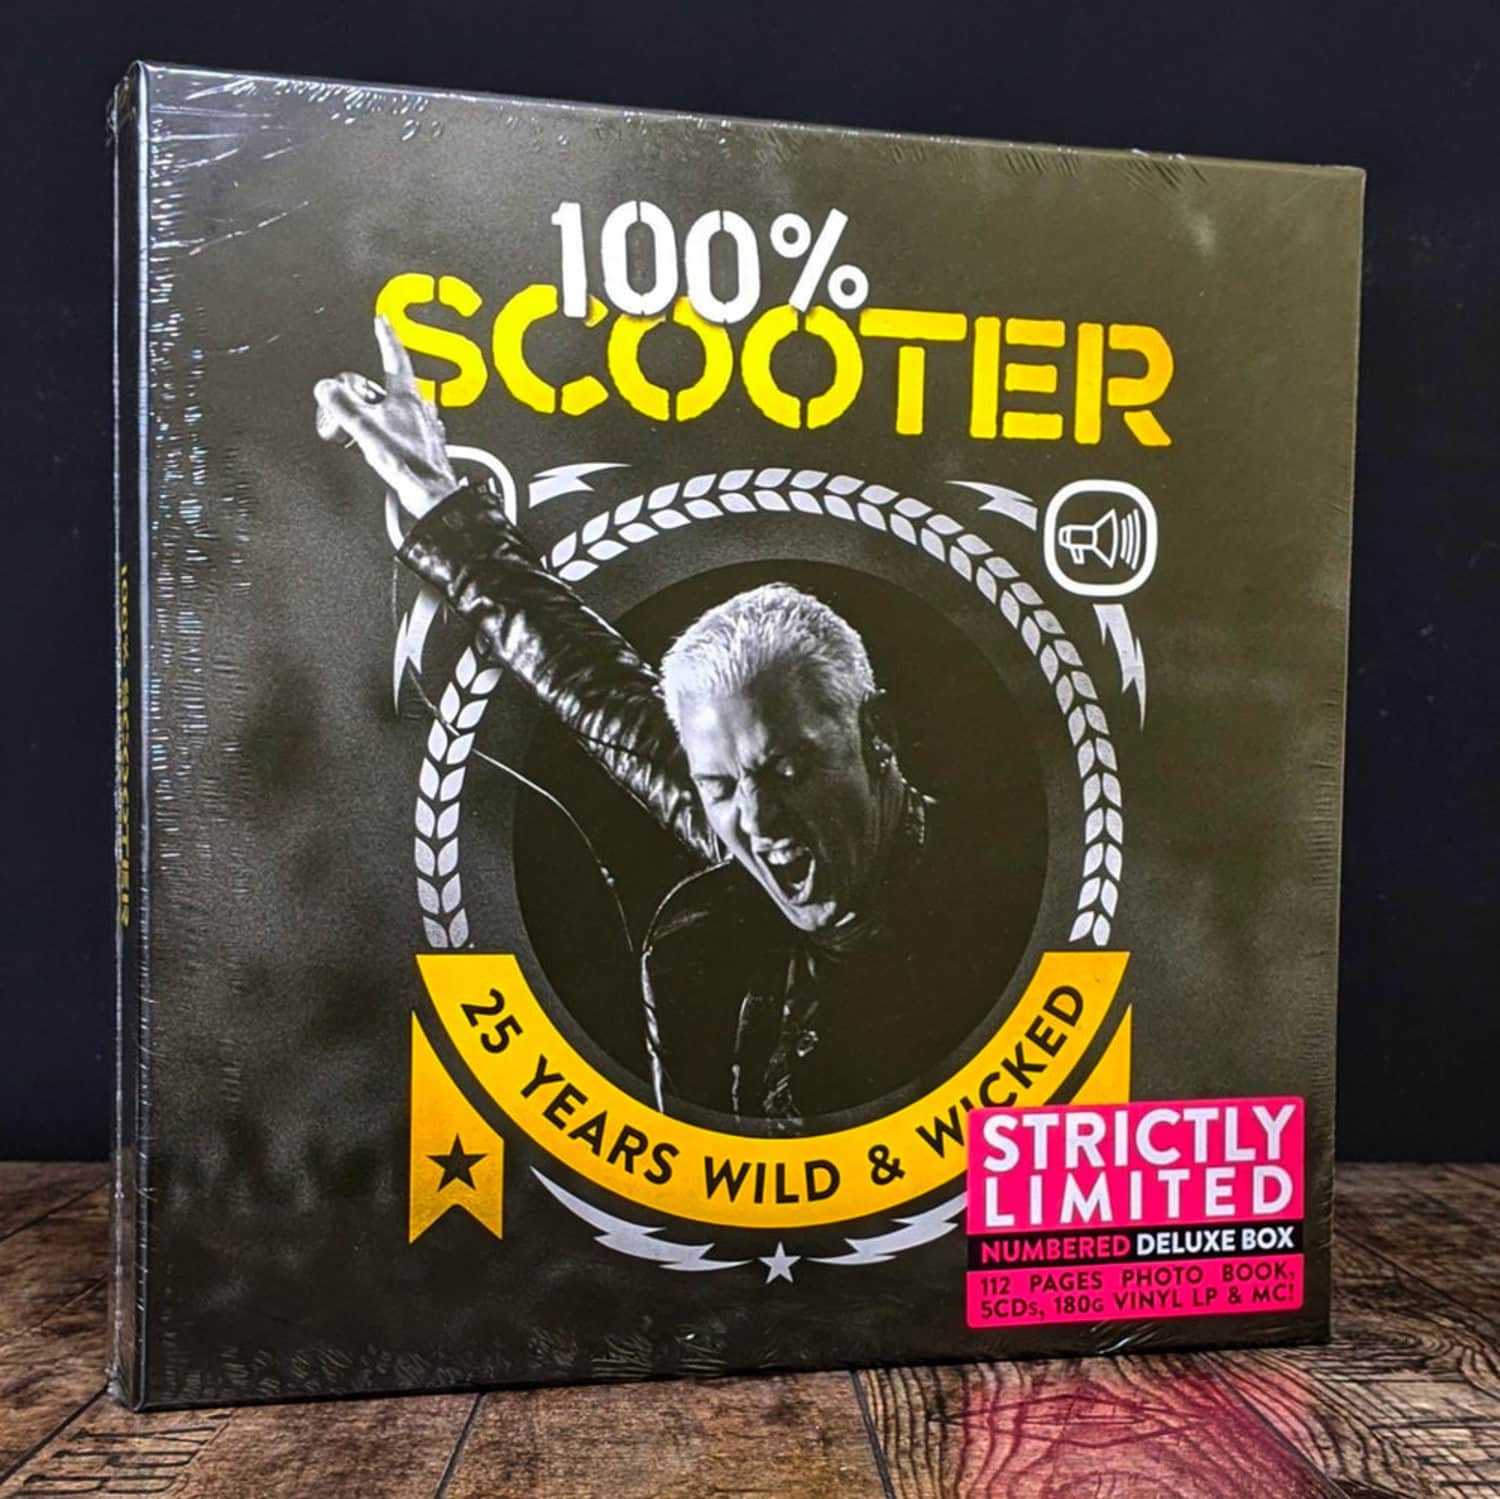 Scooter - 100% SCOOTER - 25 YEARS WILD & WICKED 